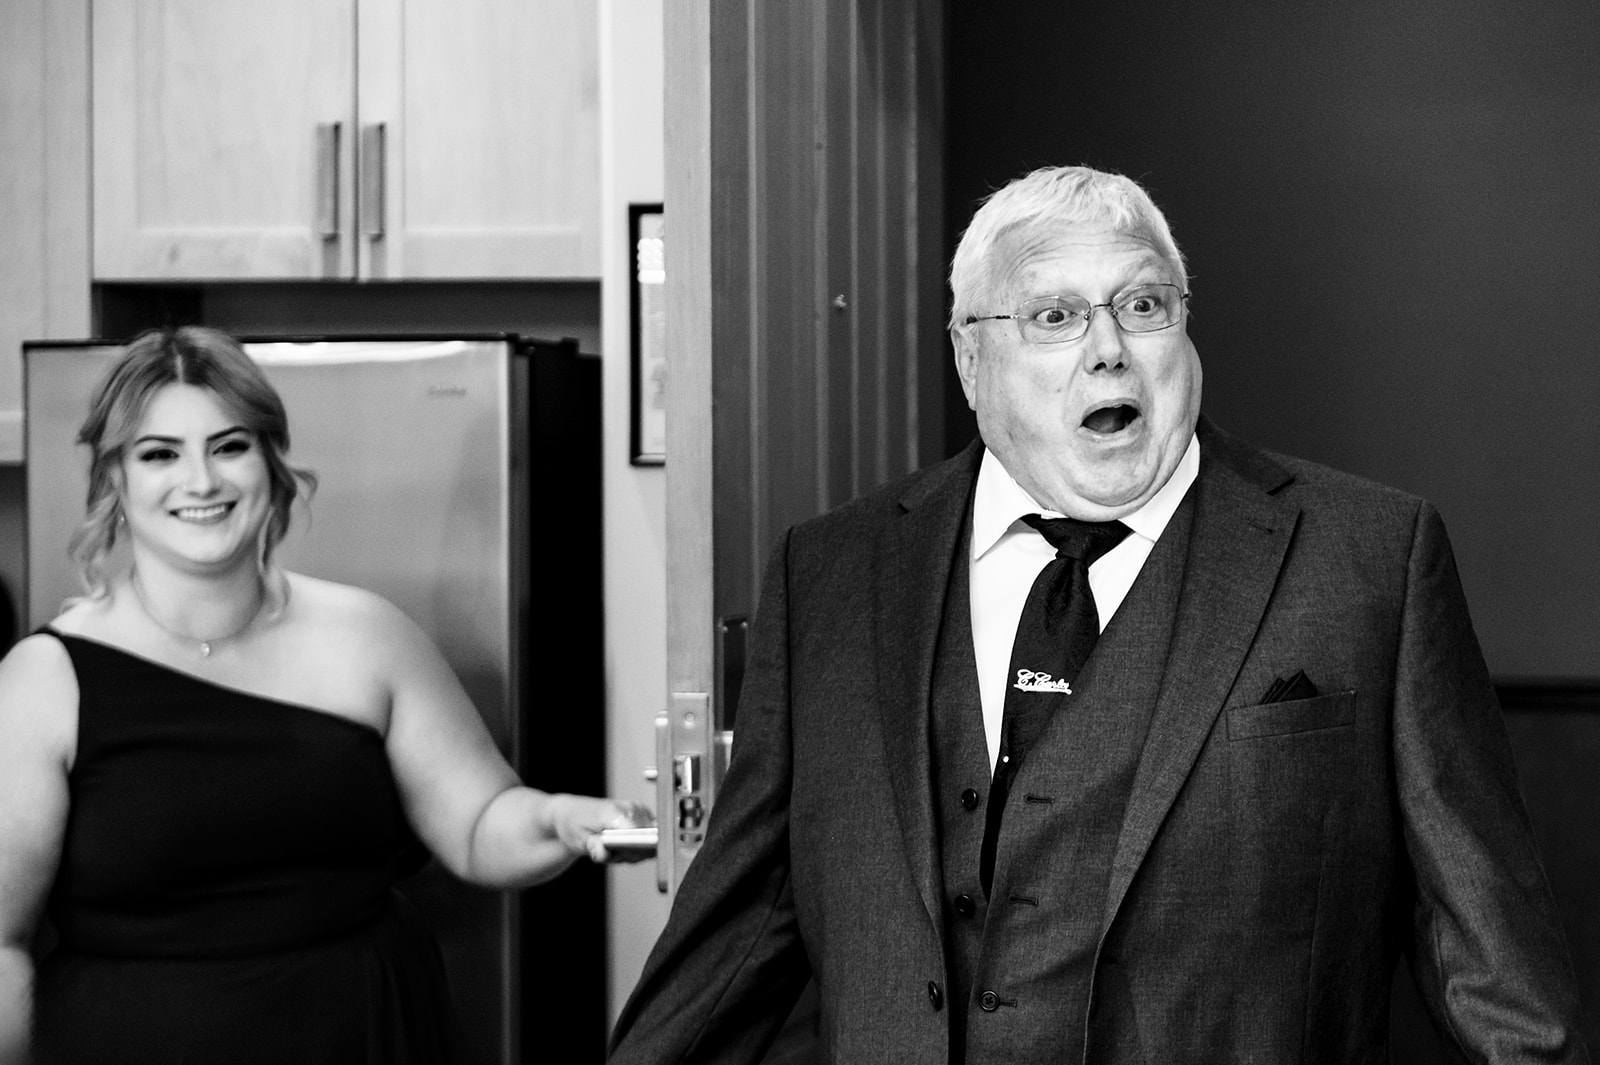 BW photograph of a dad reacting to his daughter in her wedding dress